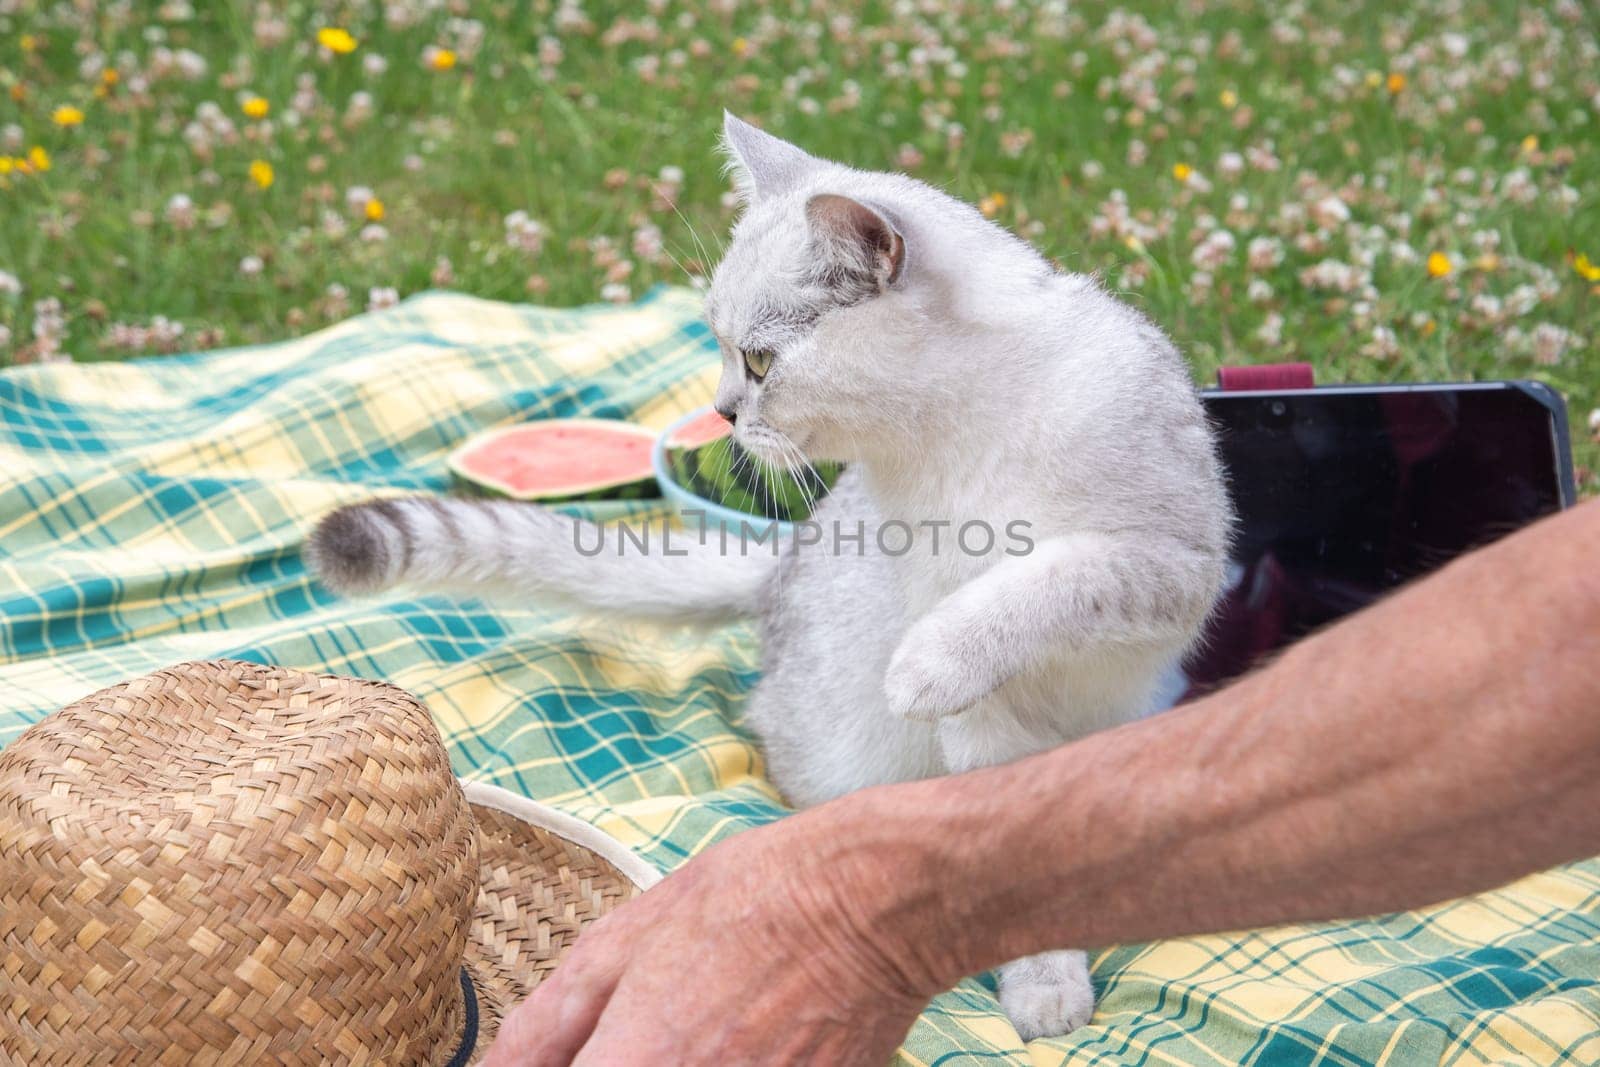 cute kitten sits on a laptop keyboard on a green garden lawn,the owner works in nature with a fluffy pet, outdoor picnic,Digital technology,Stop working, pay attention to me,High Quality Photo